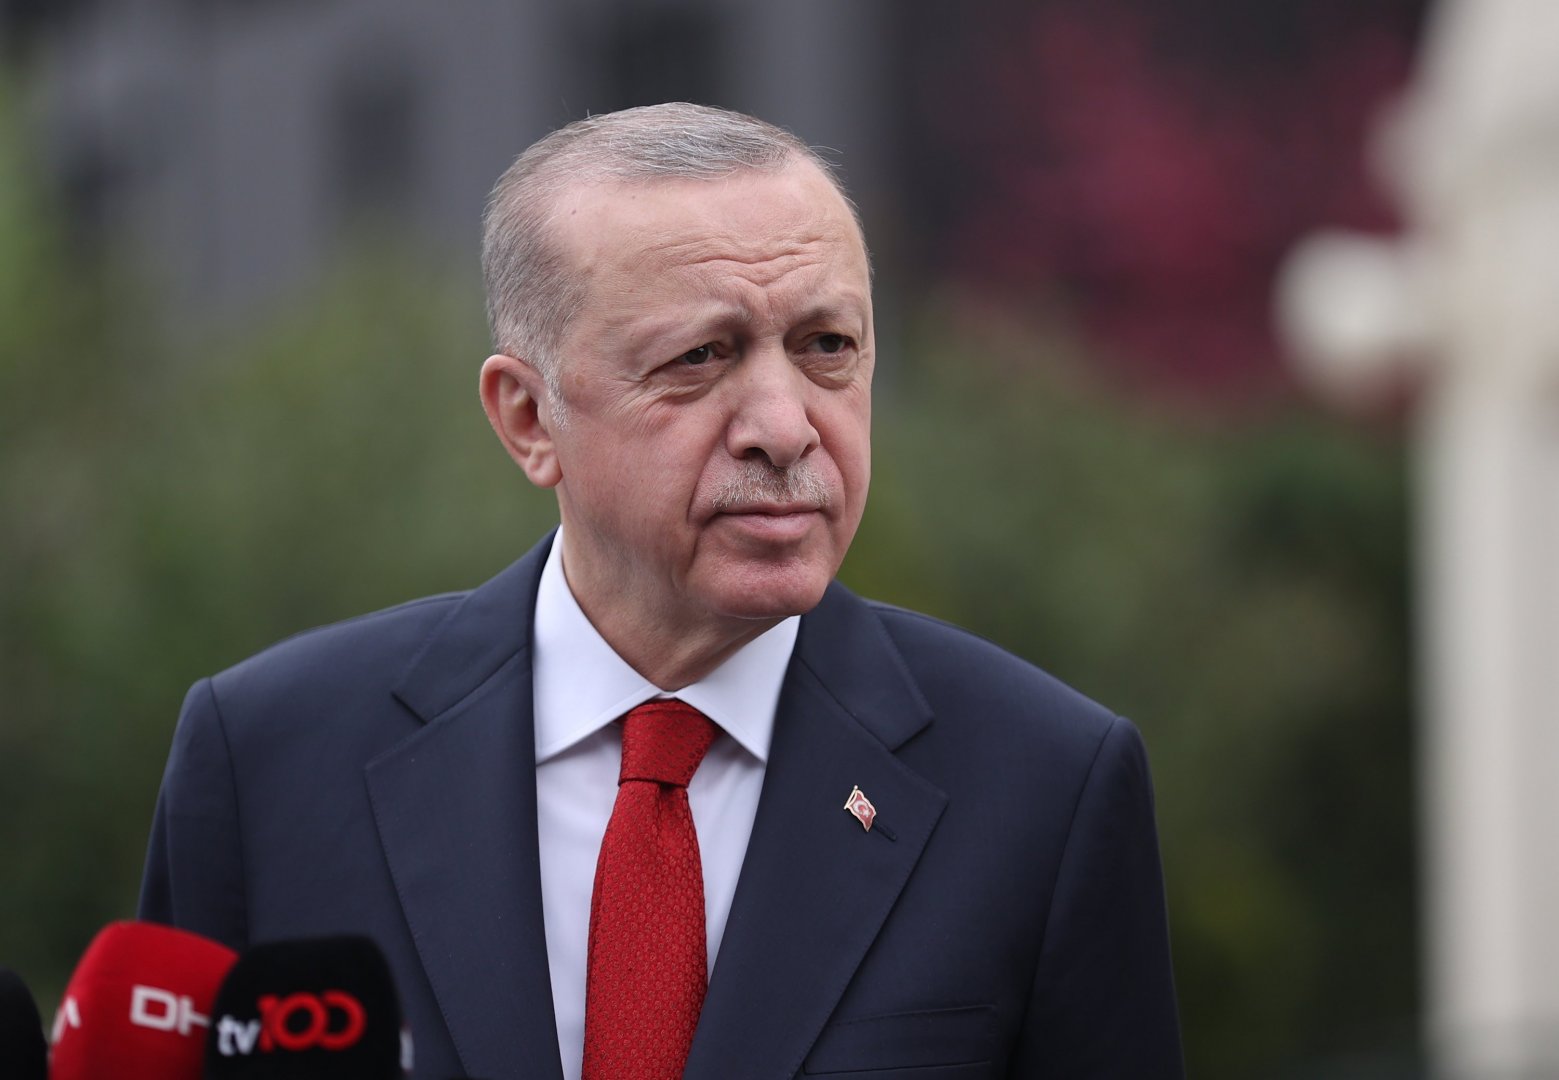 We strengthen our cooperation with Azerbaijan in all areas - Turkish president